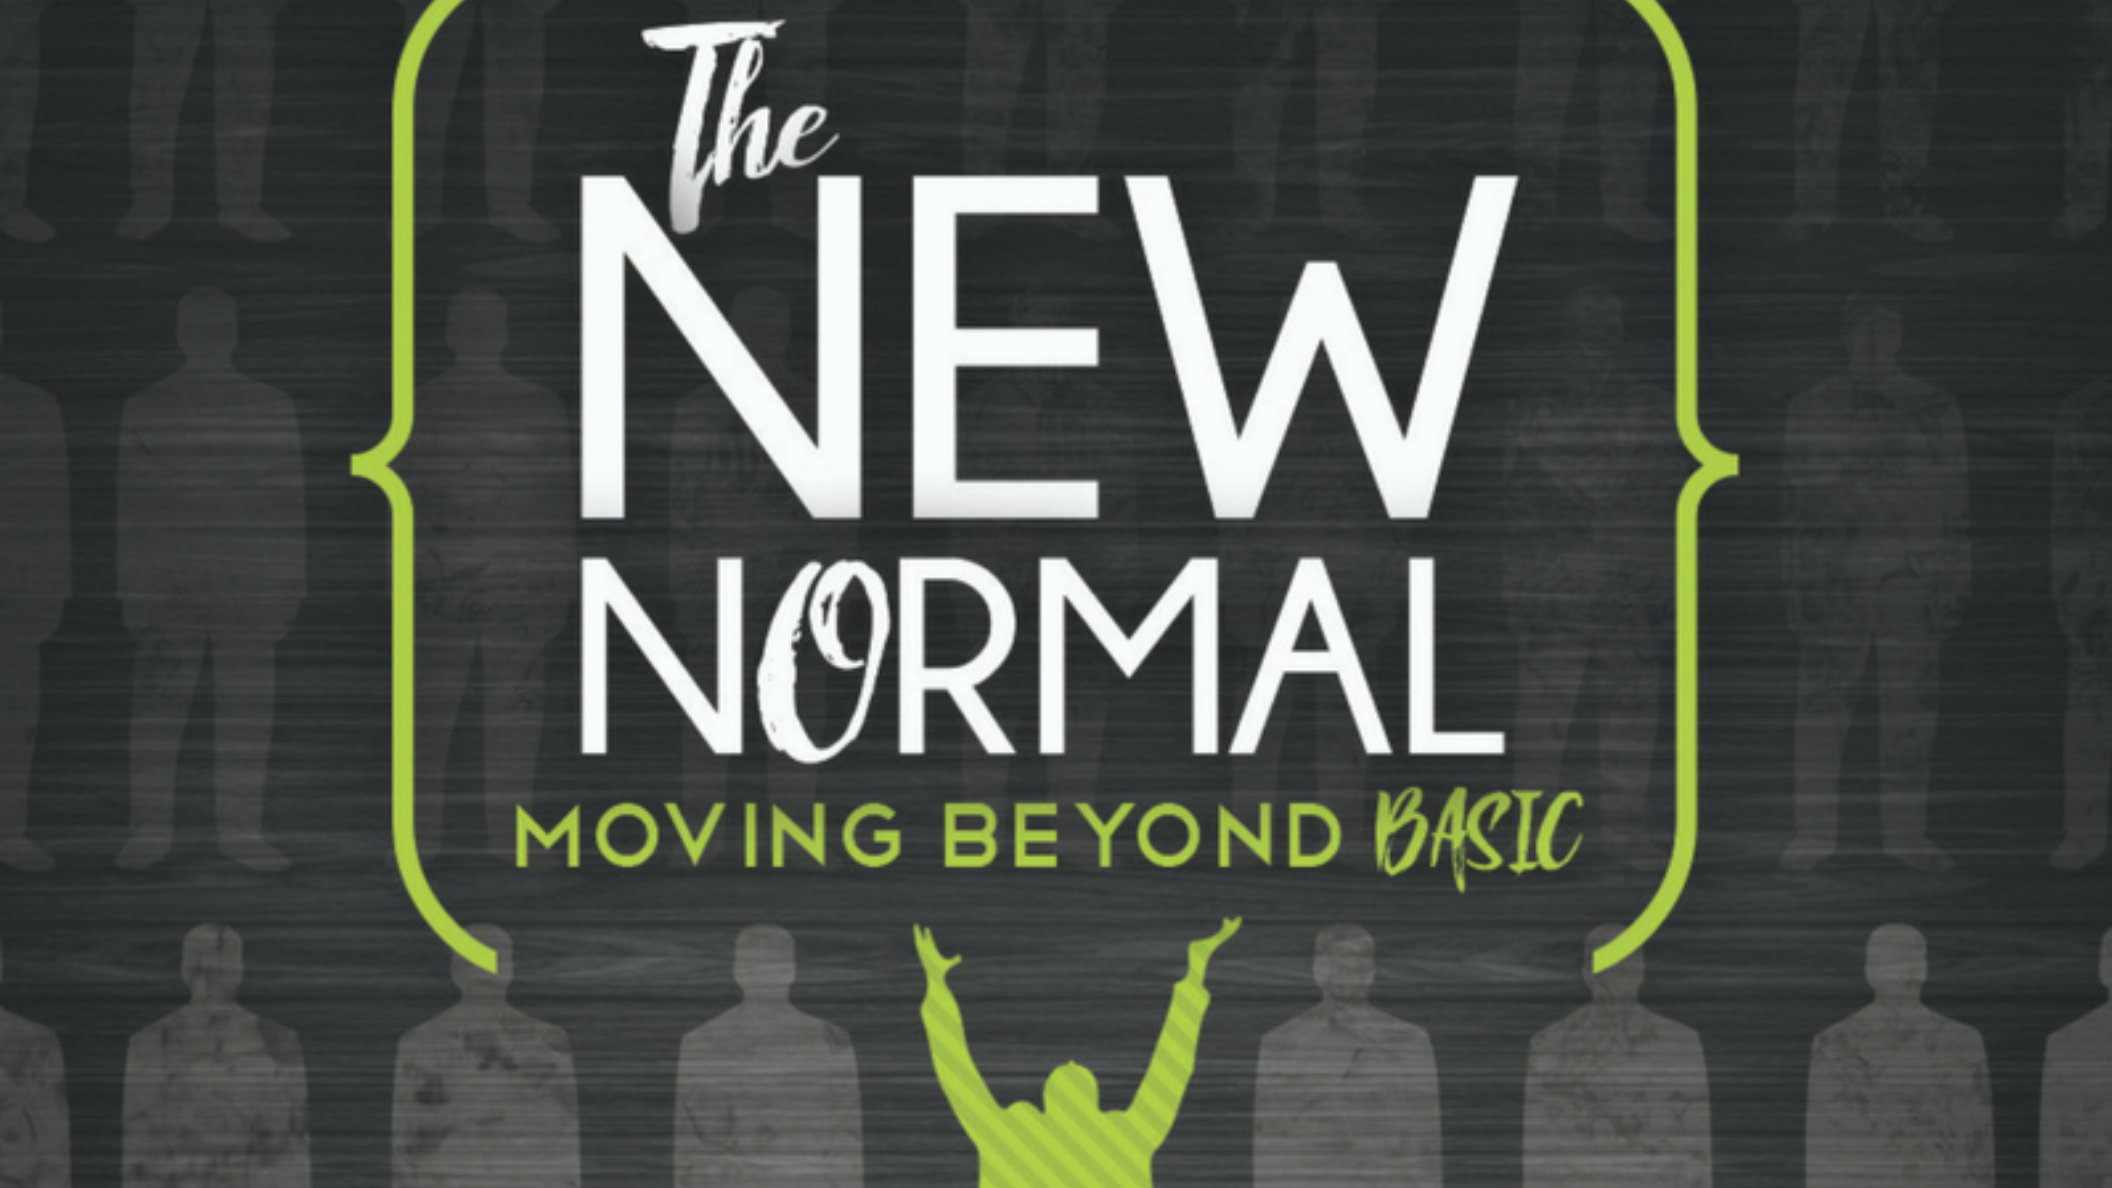 The New Normal Series, Nations Church